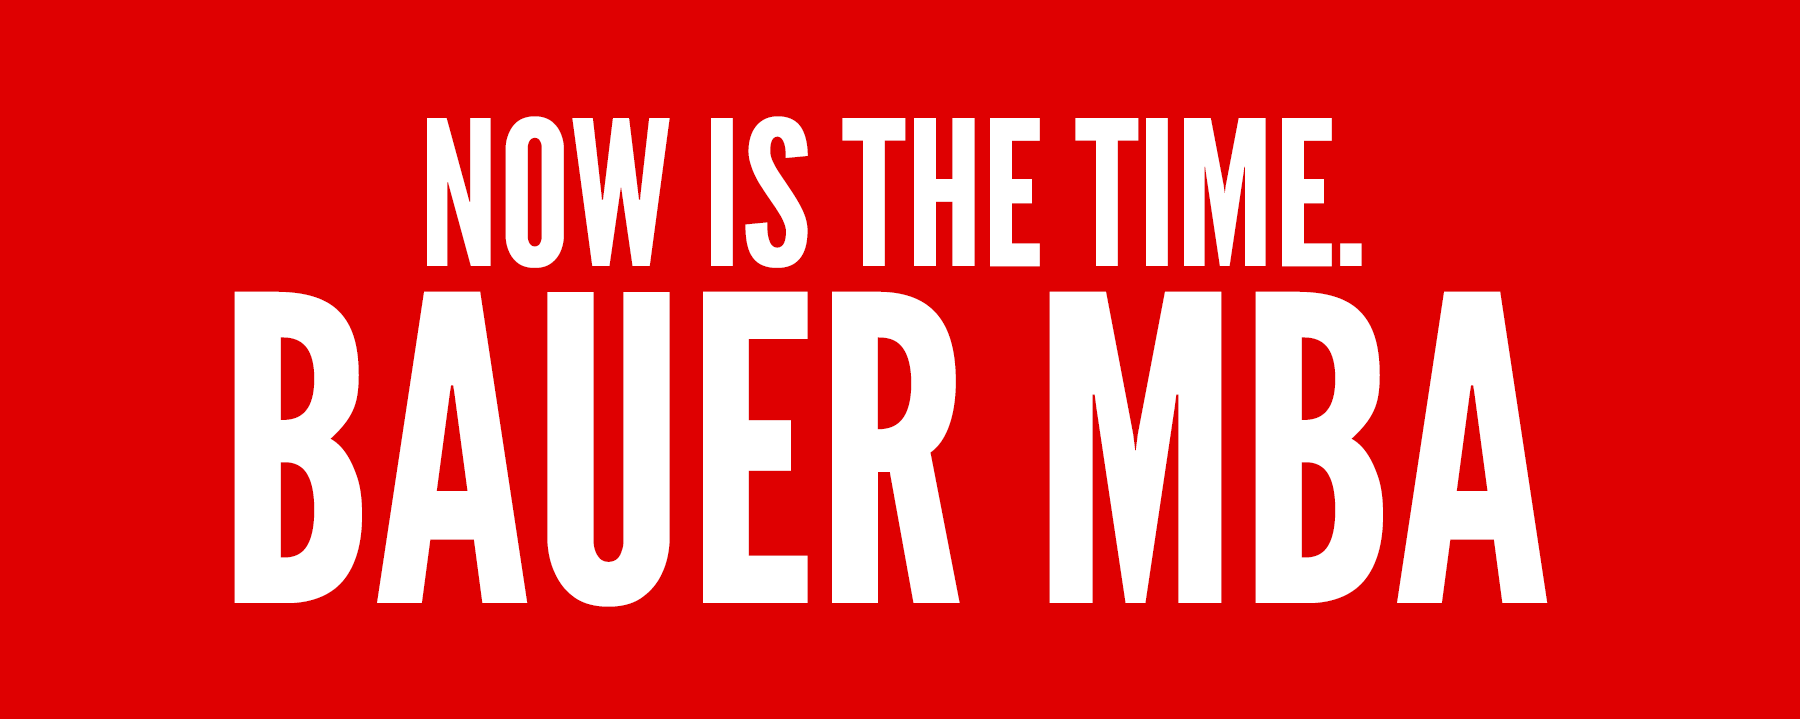 Now is the Time | Bauer MBA